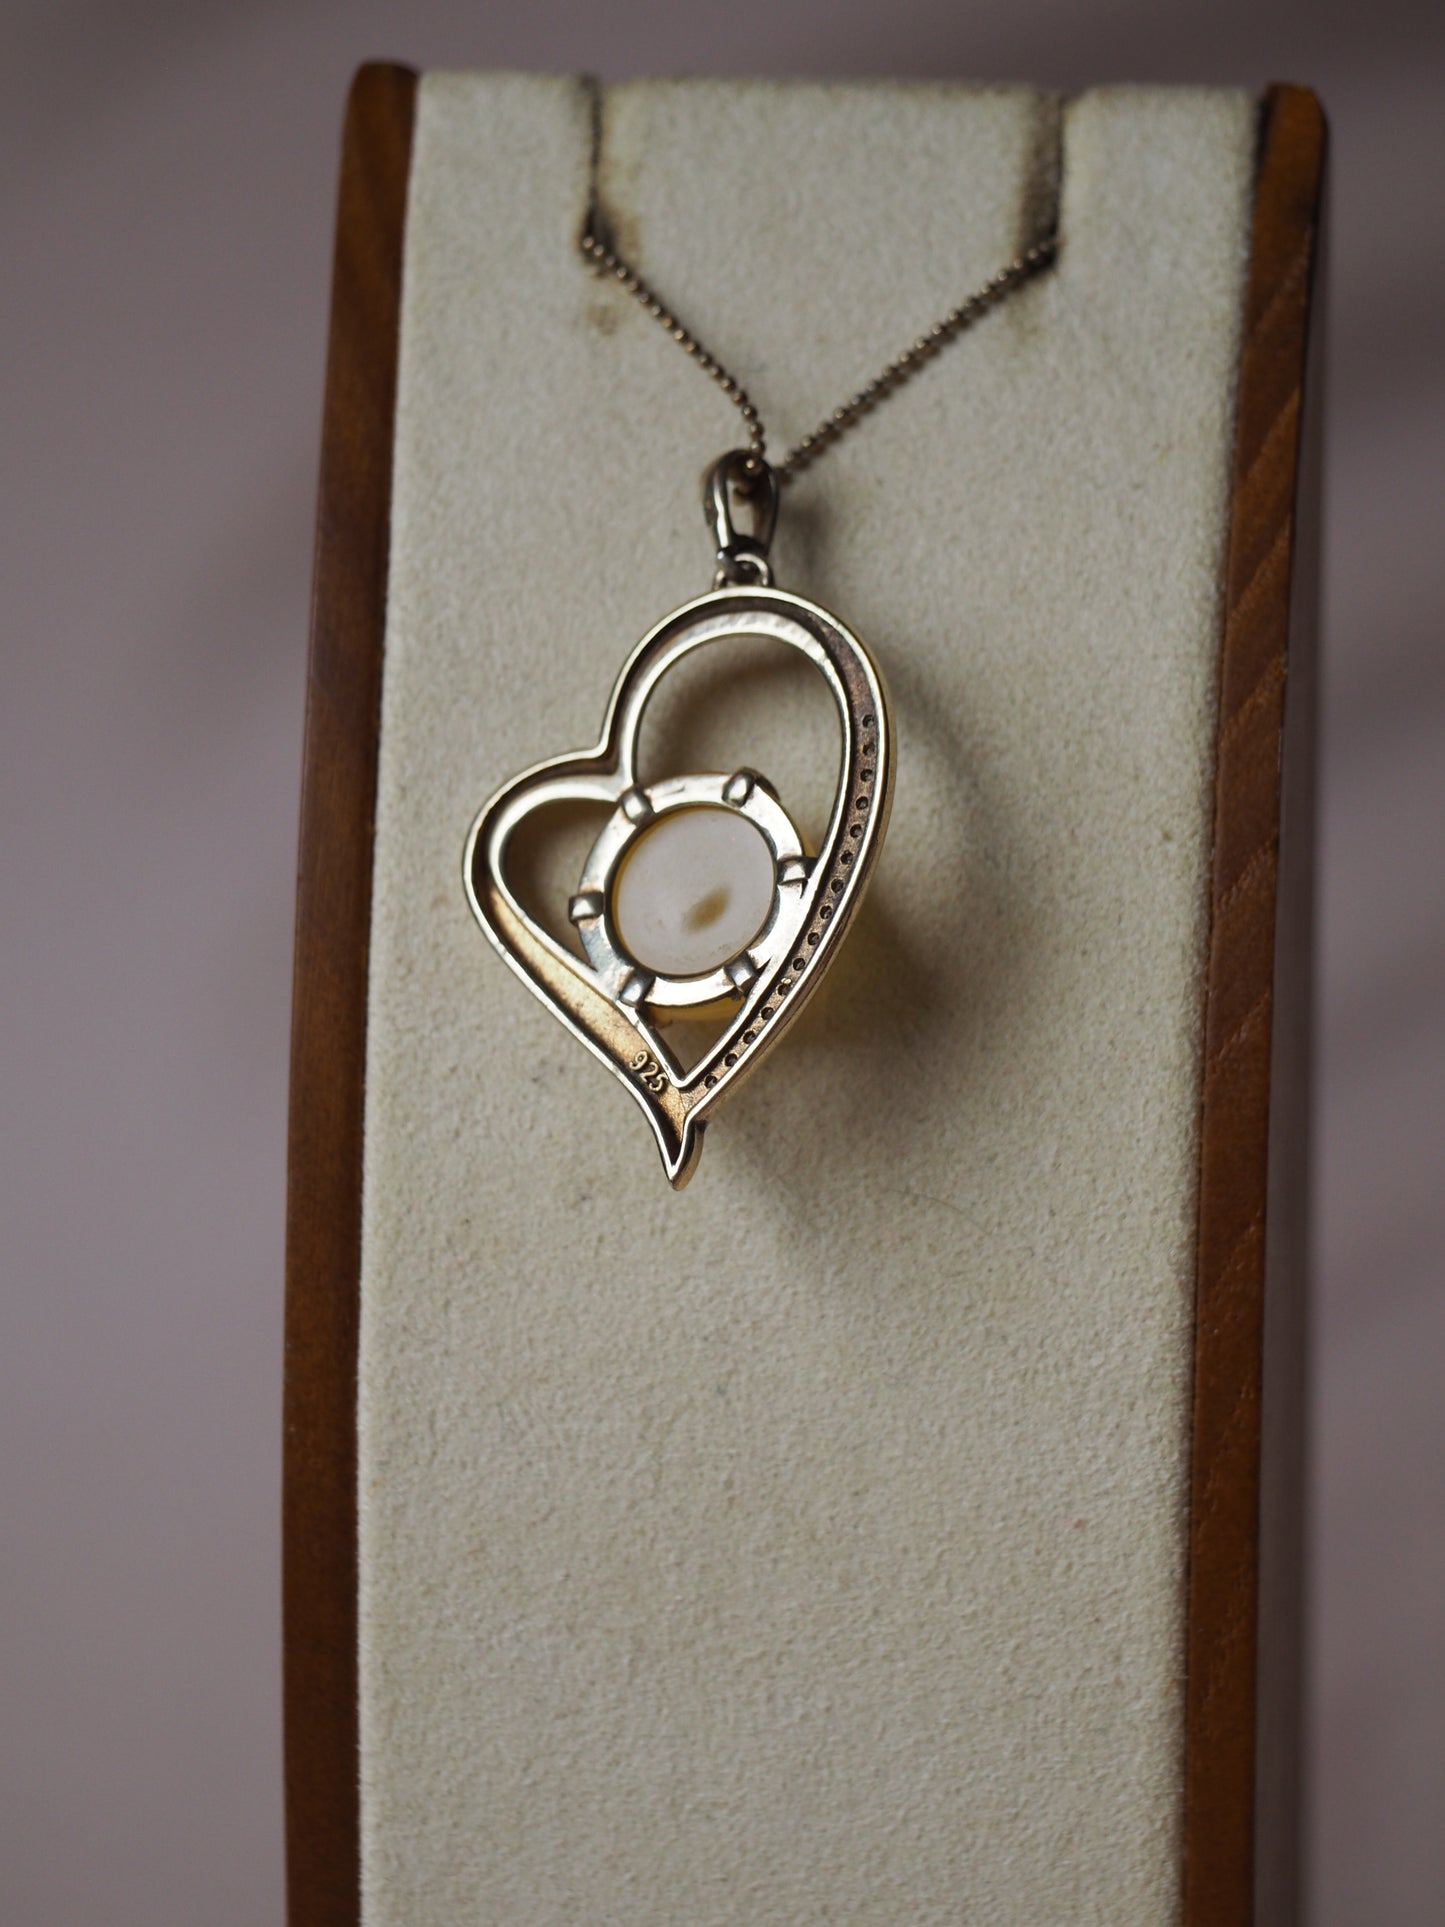 Open Heart Gold Plated Pendant with Butterscotch Amber and Rhinestones